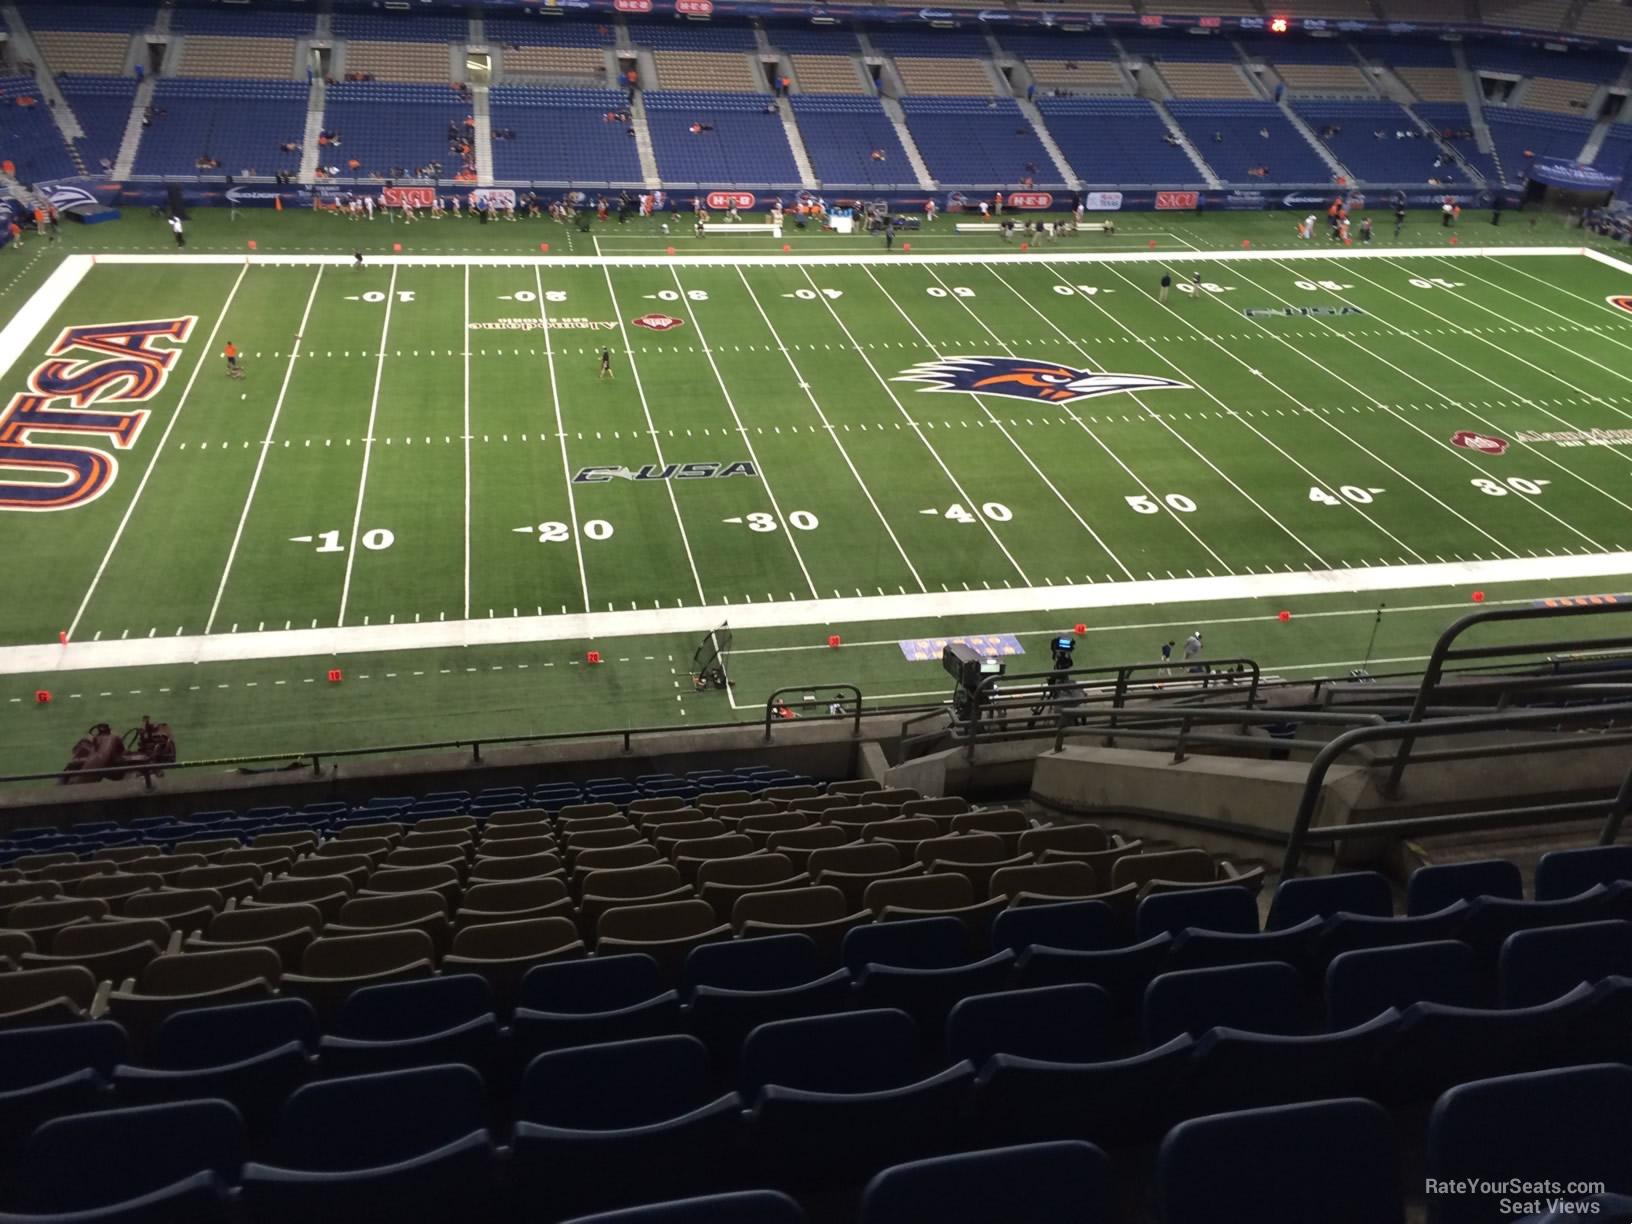 section 315, row 15 seat view  for football - alamodome